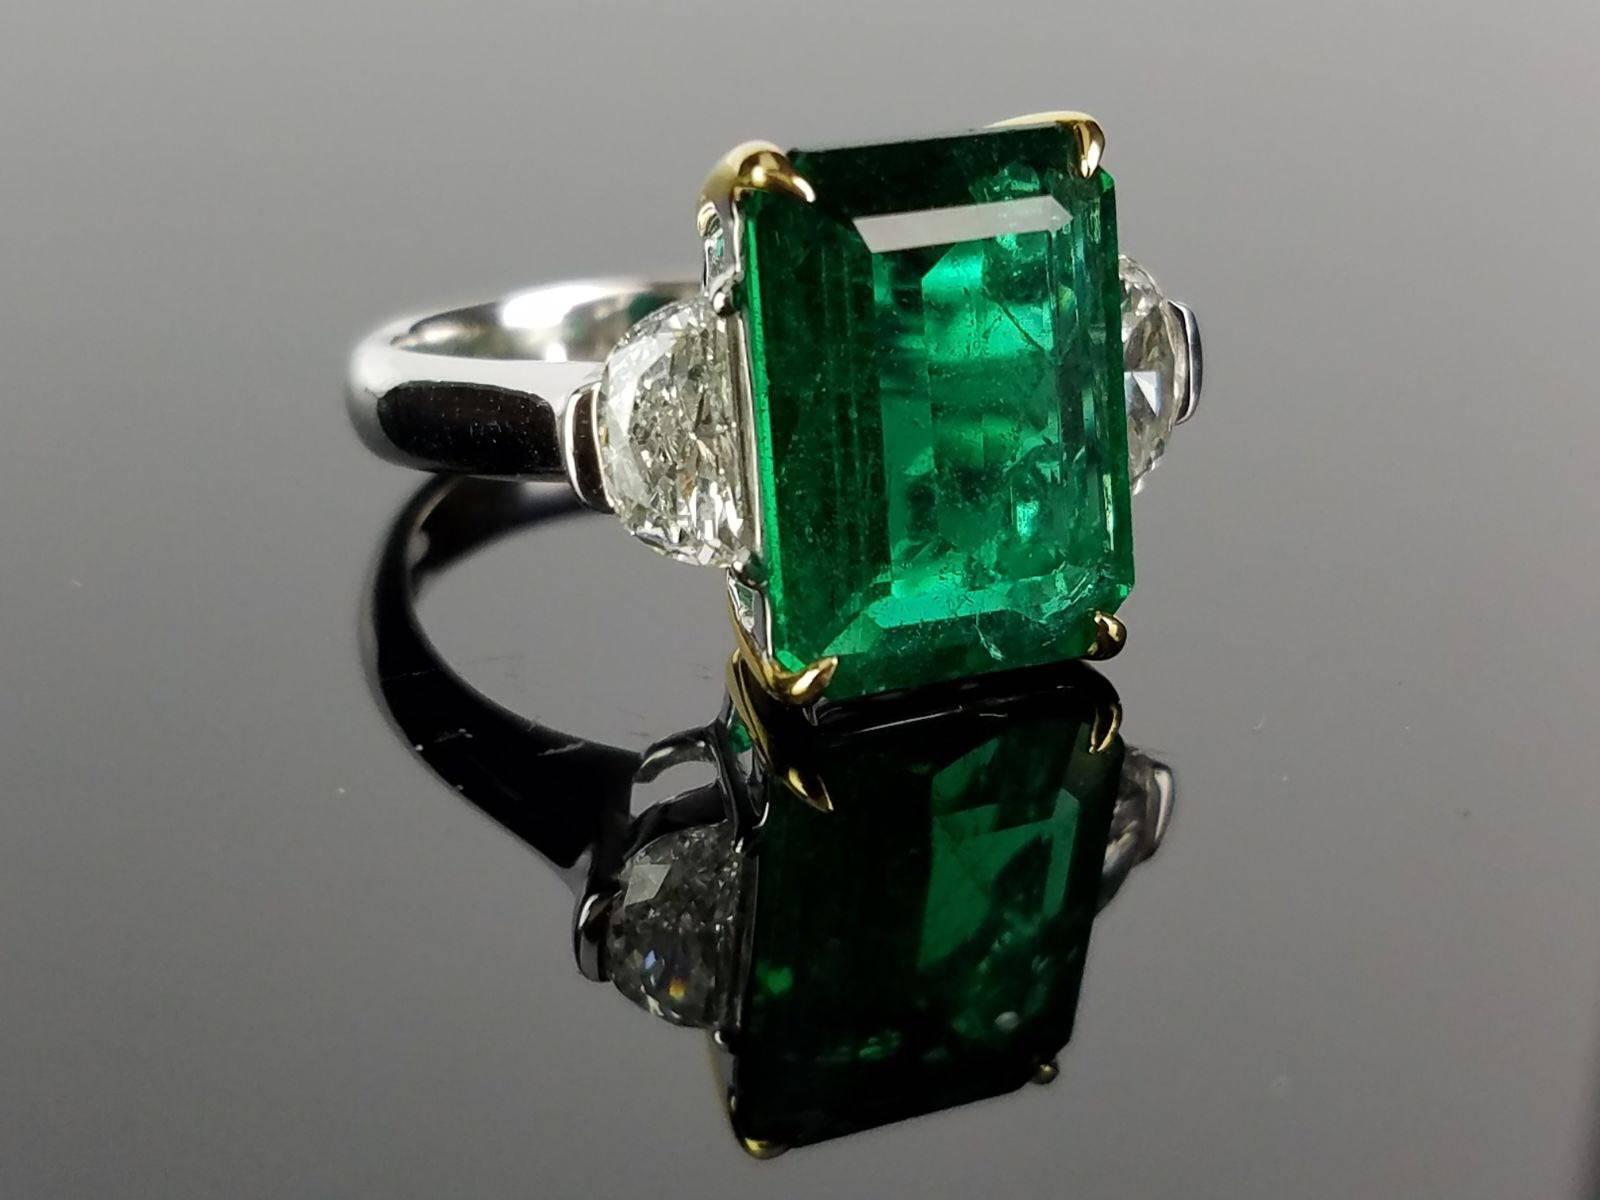 Classic Emerald ring with 2 half-moon Diamond side stones.

Center Stone Details: 
Stone: ZambianEmerald
Cut: Emerald Cut
Weight: 4.99 carat 

Side Diamond Details: 
Cut: Half moon
Total Carat Weight: 0.83 carat 
Quality: VS2, H/I 

18K Gold: 5.22